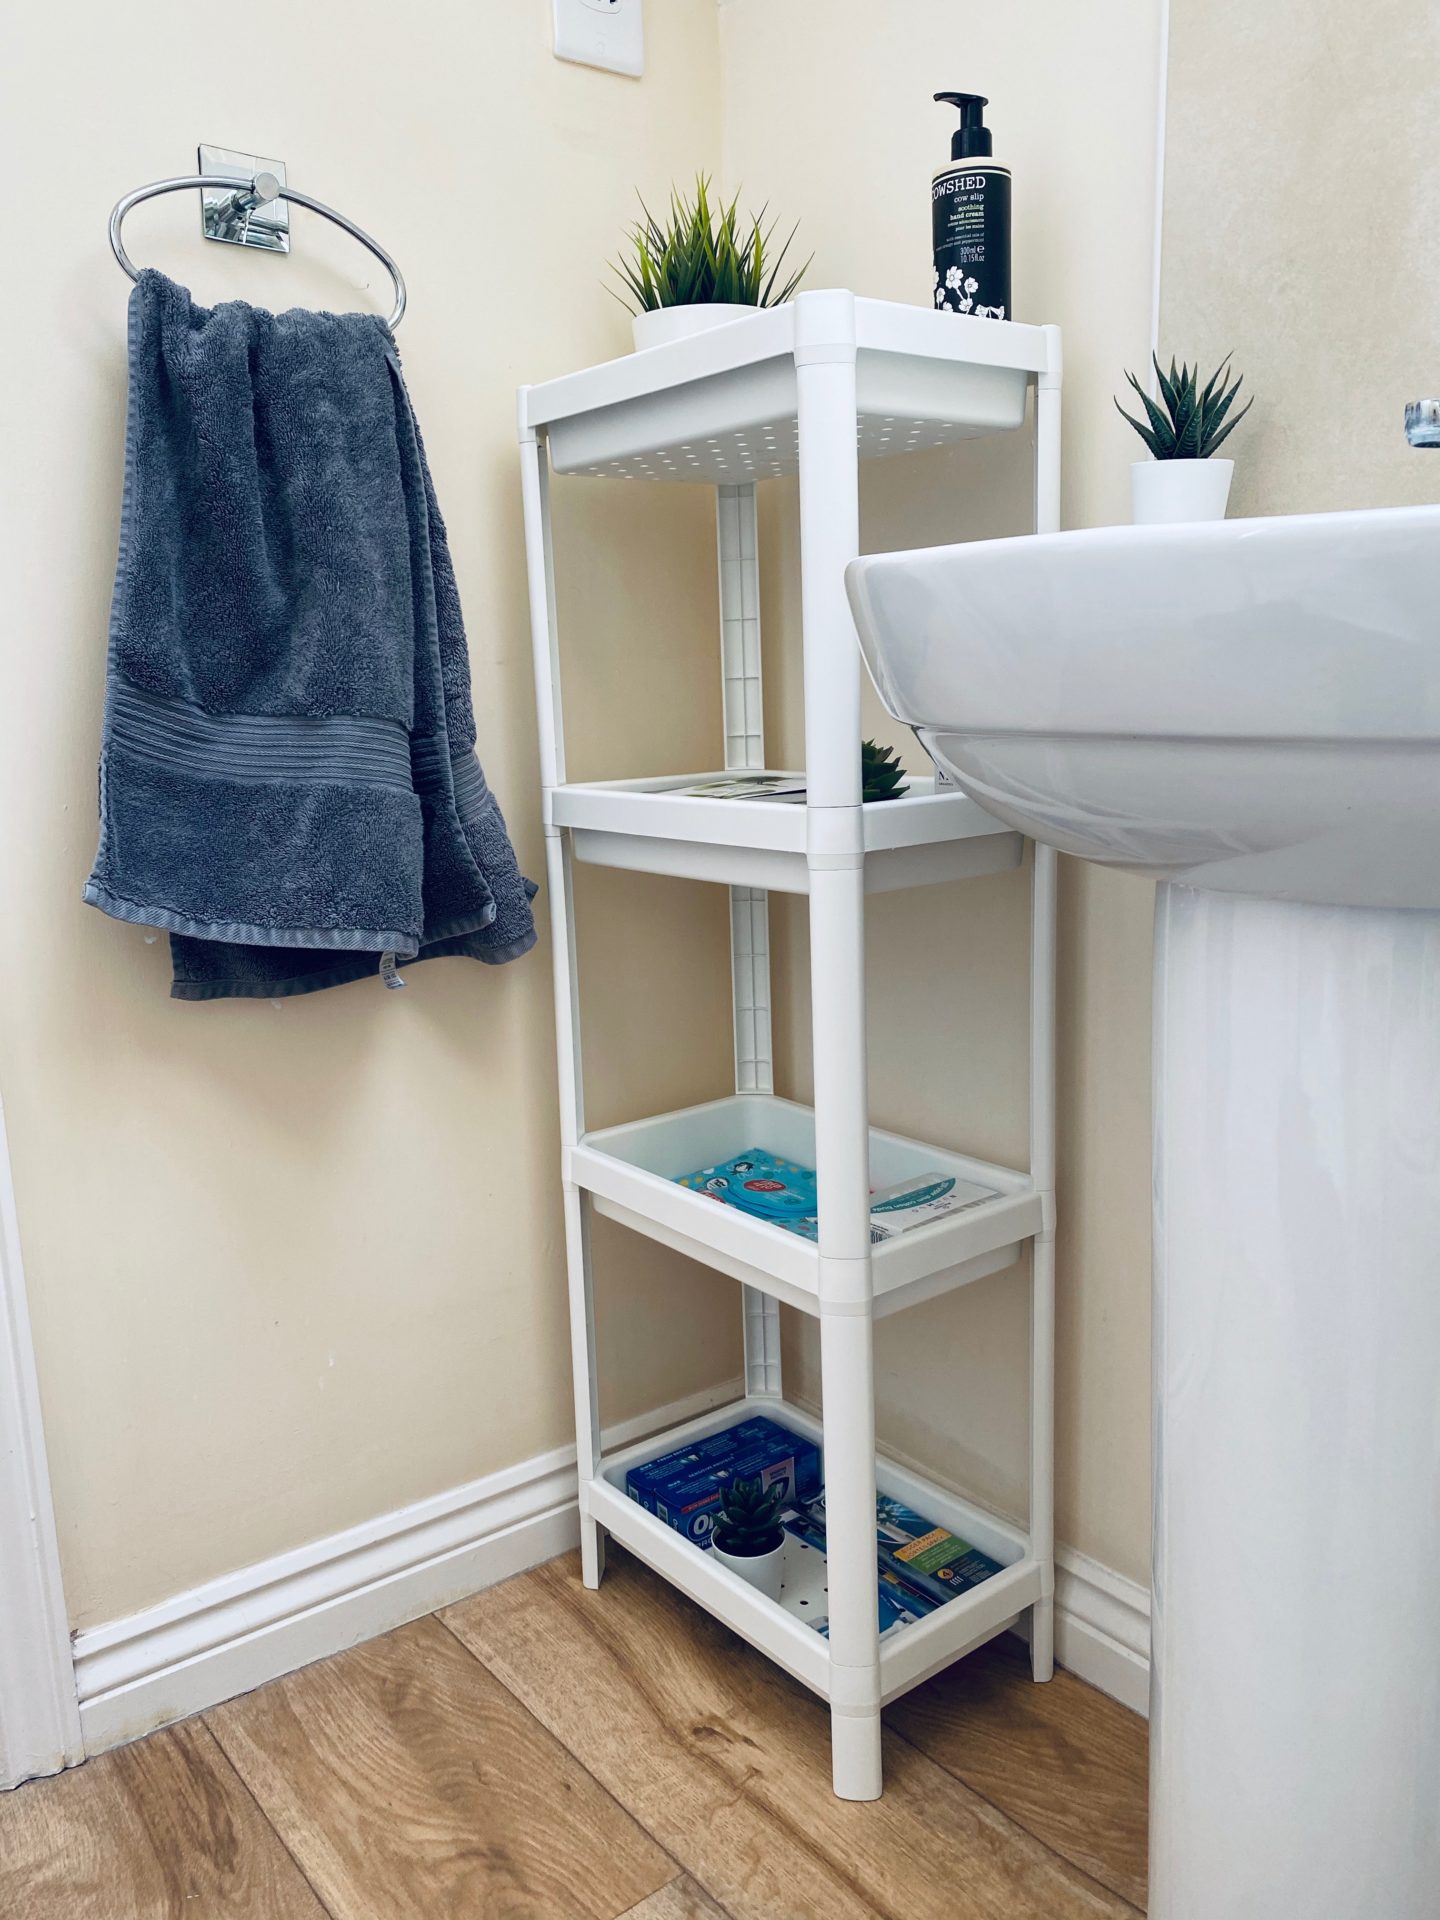 AD: Taking back control of mornings for only £51.75 with IKEA organisation hacks. Bathroom after IKEA items. 